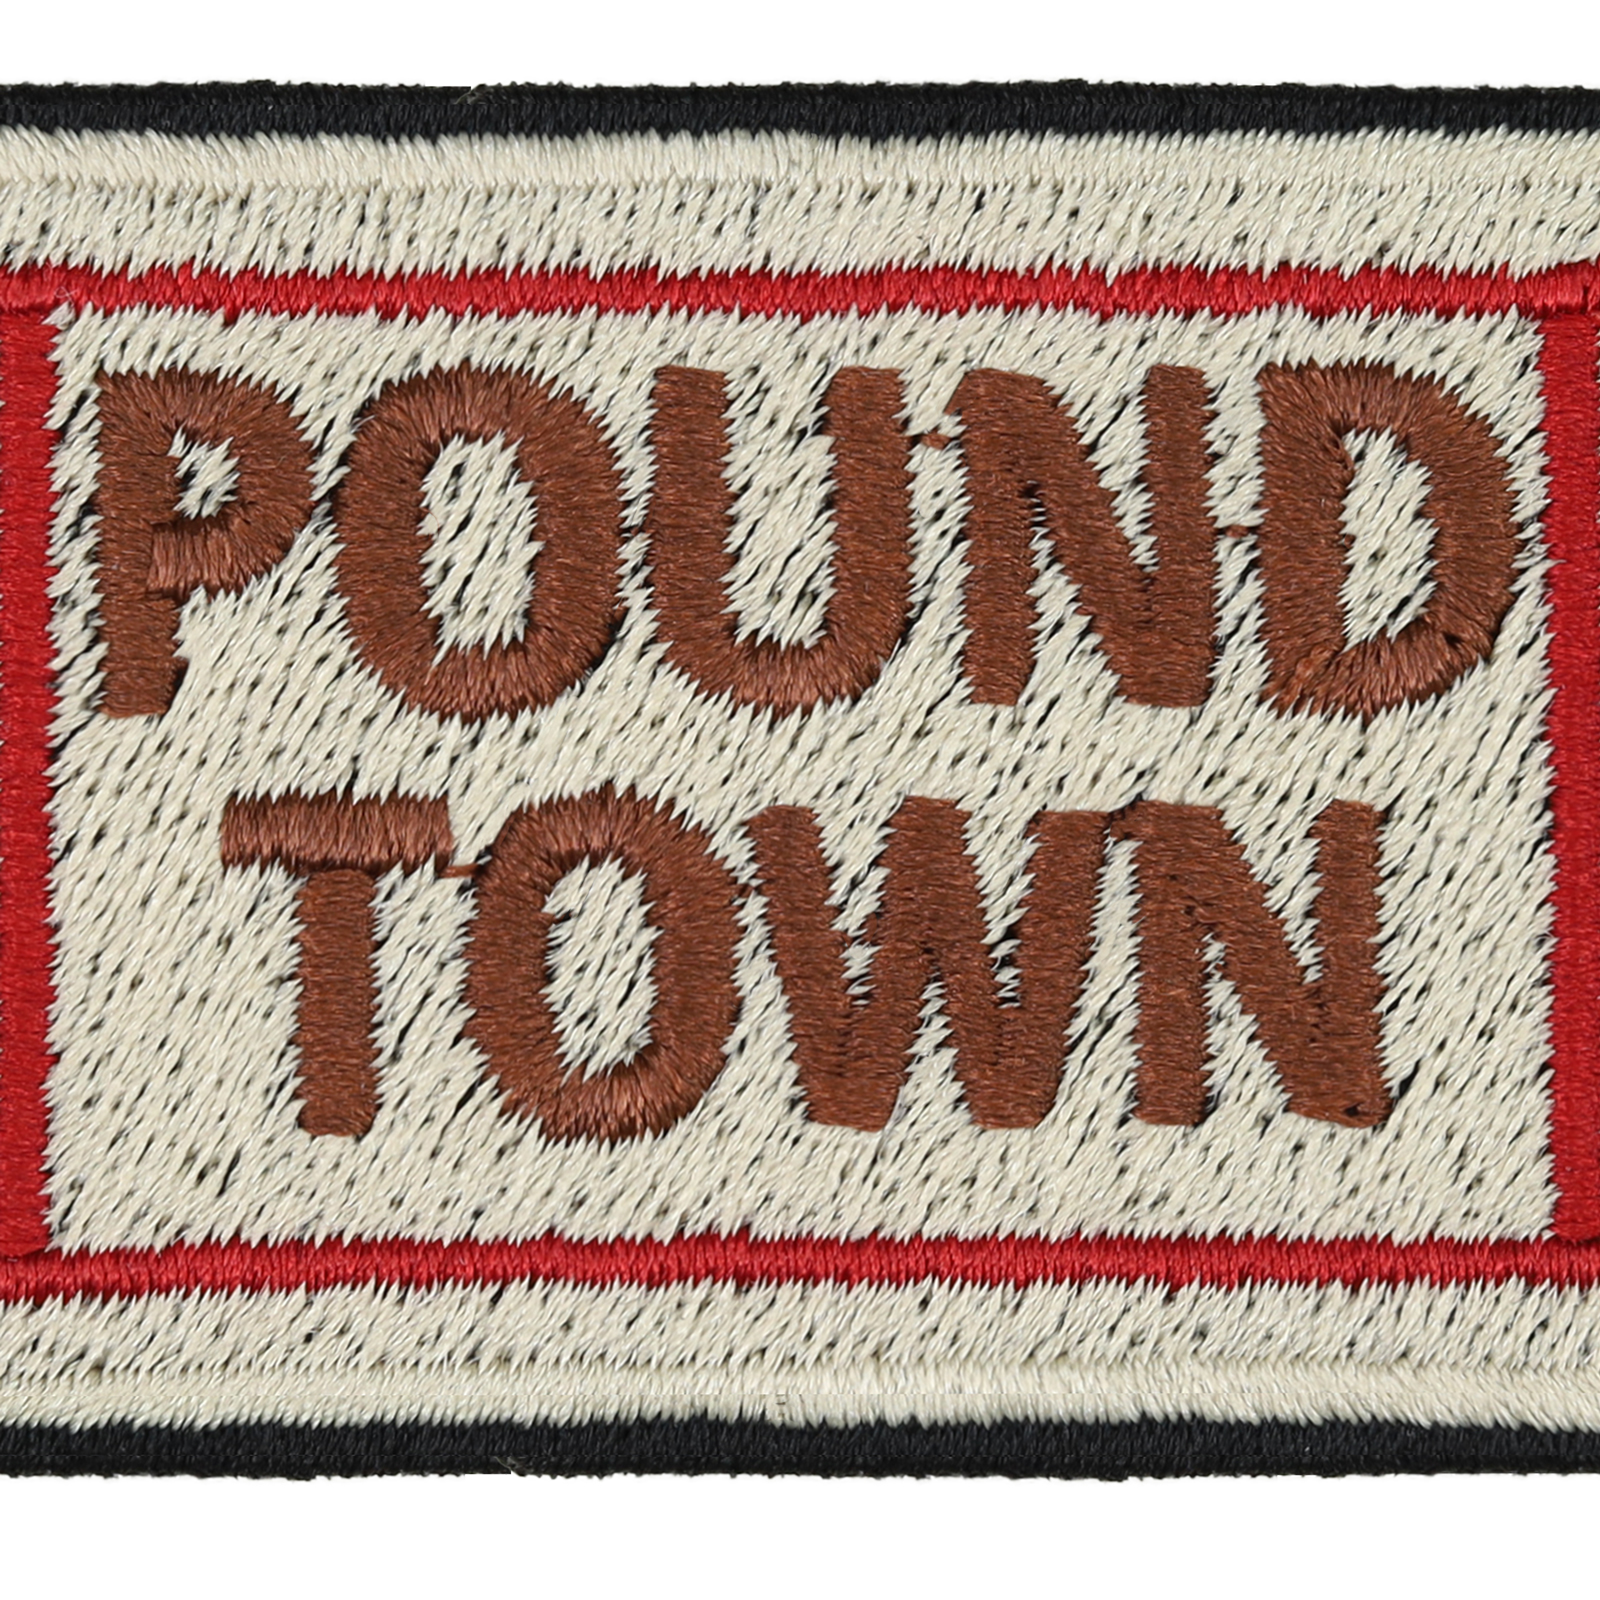 One way ticket to pound town - Patch